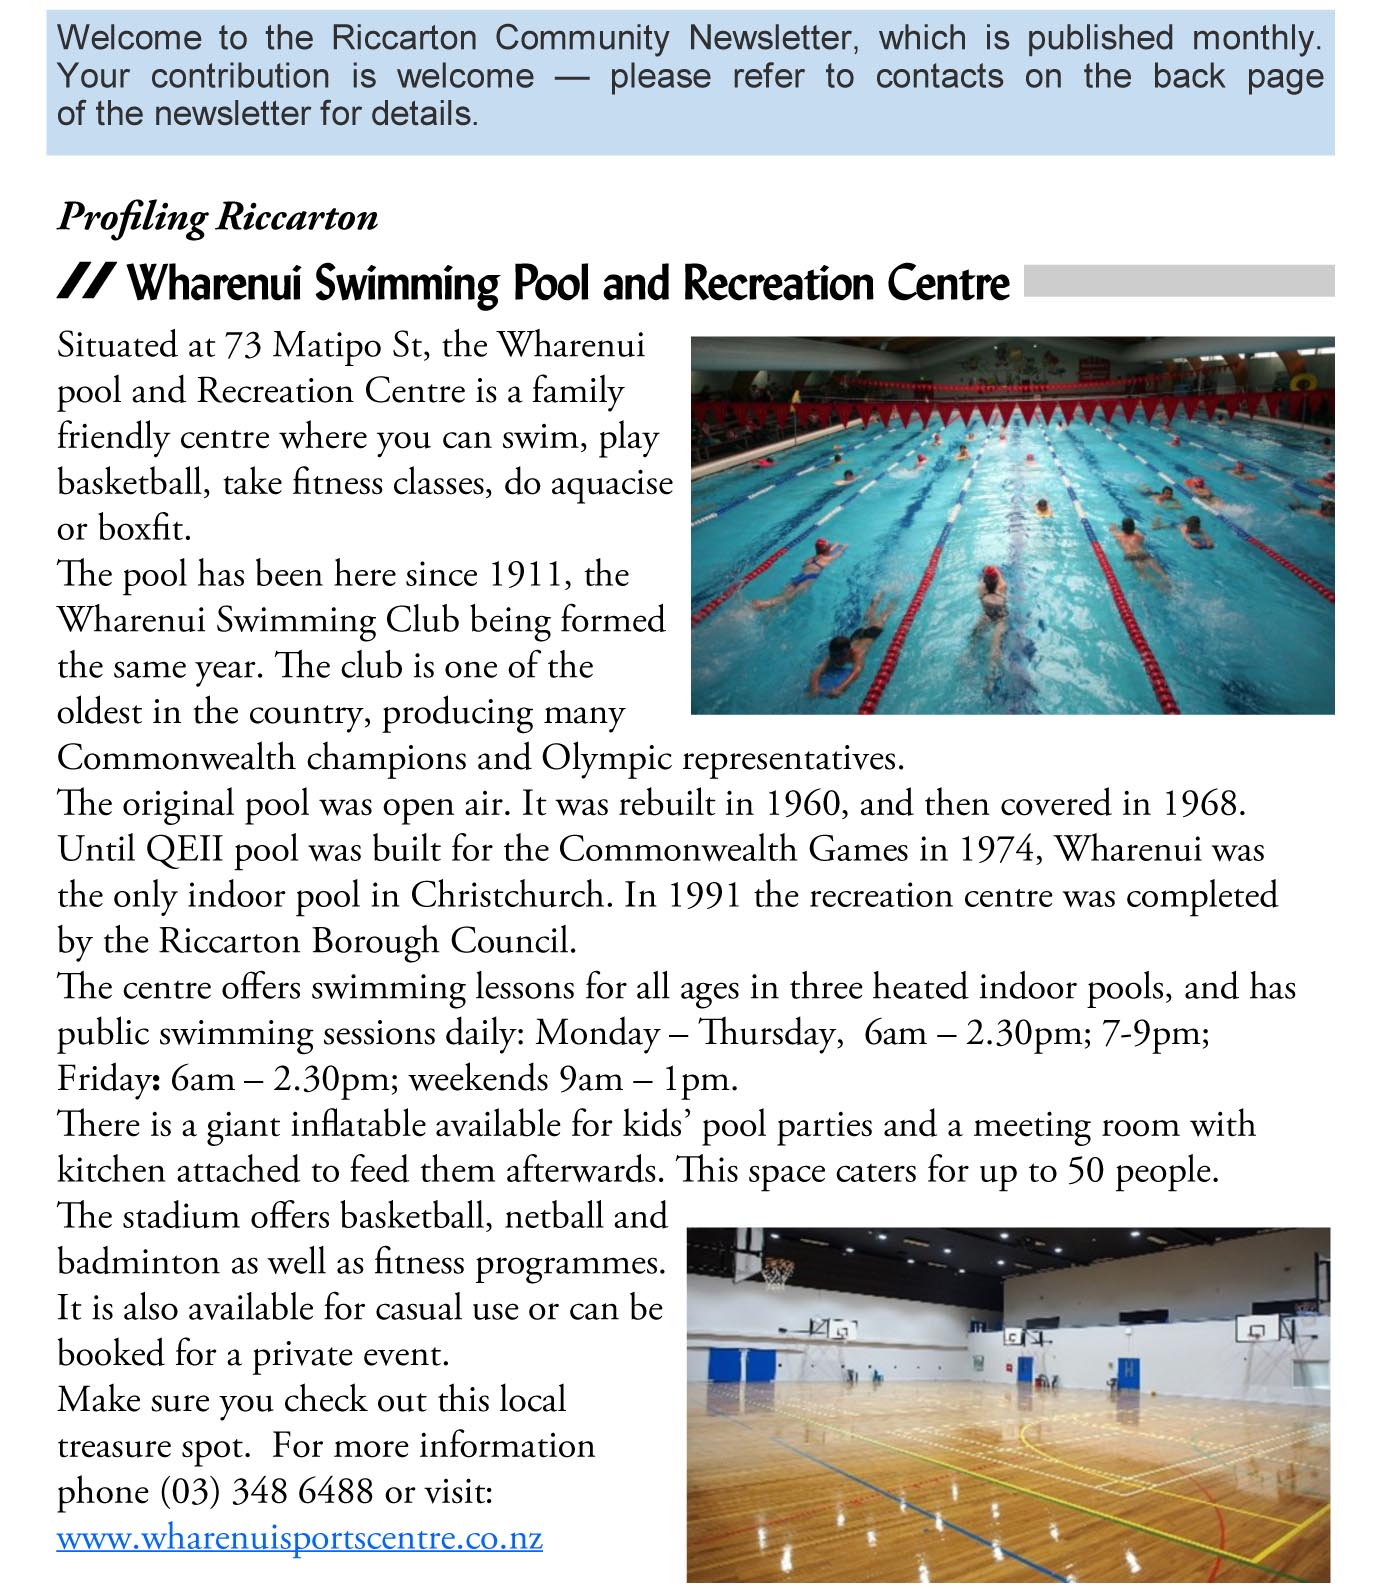 RC Newsletter Feb 2021 p1 cropped